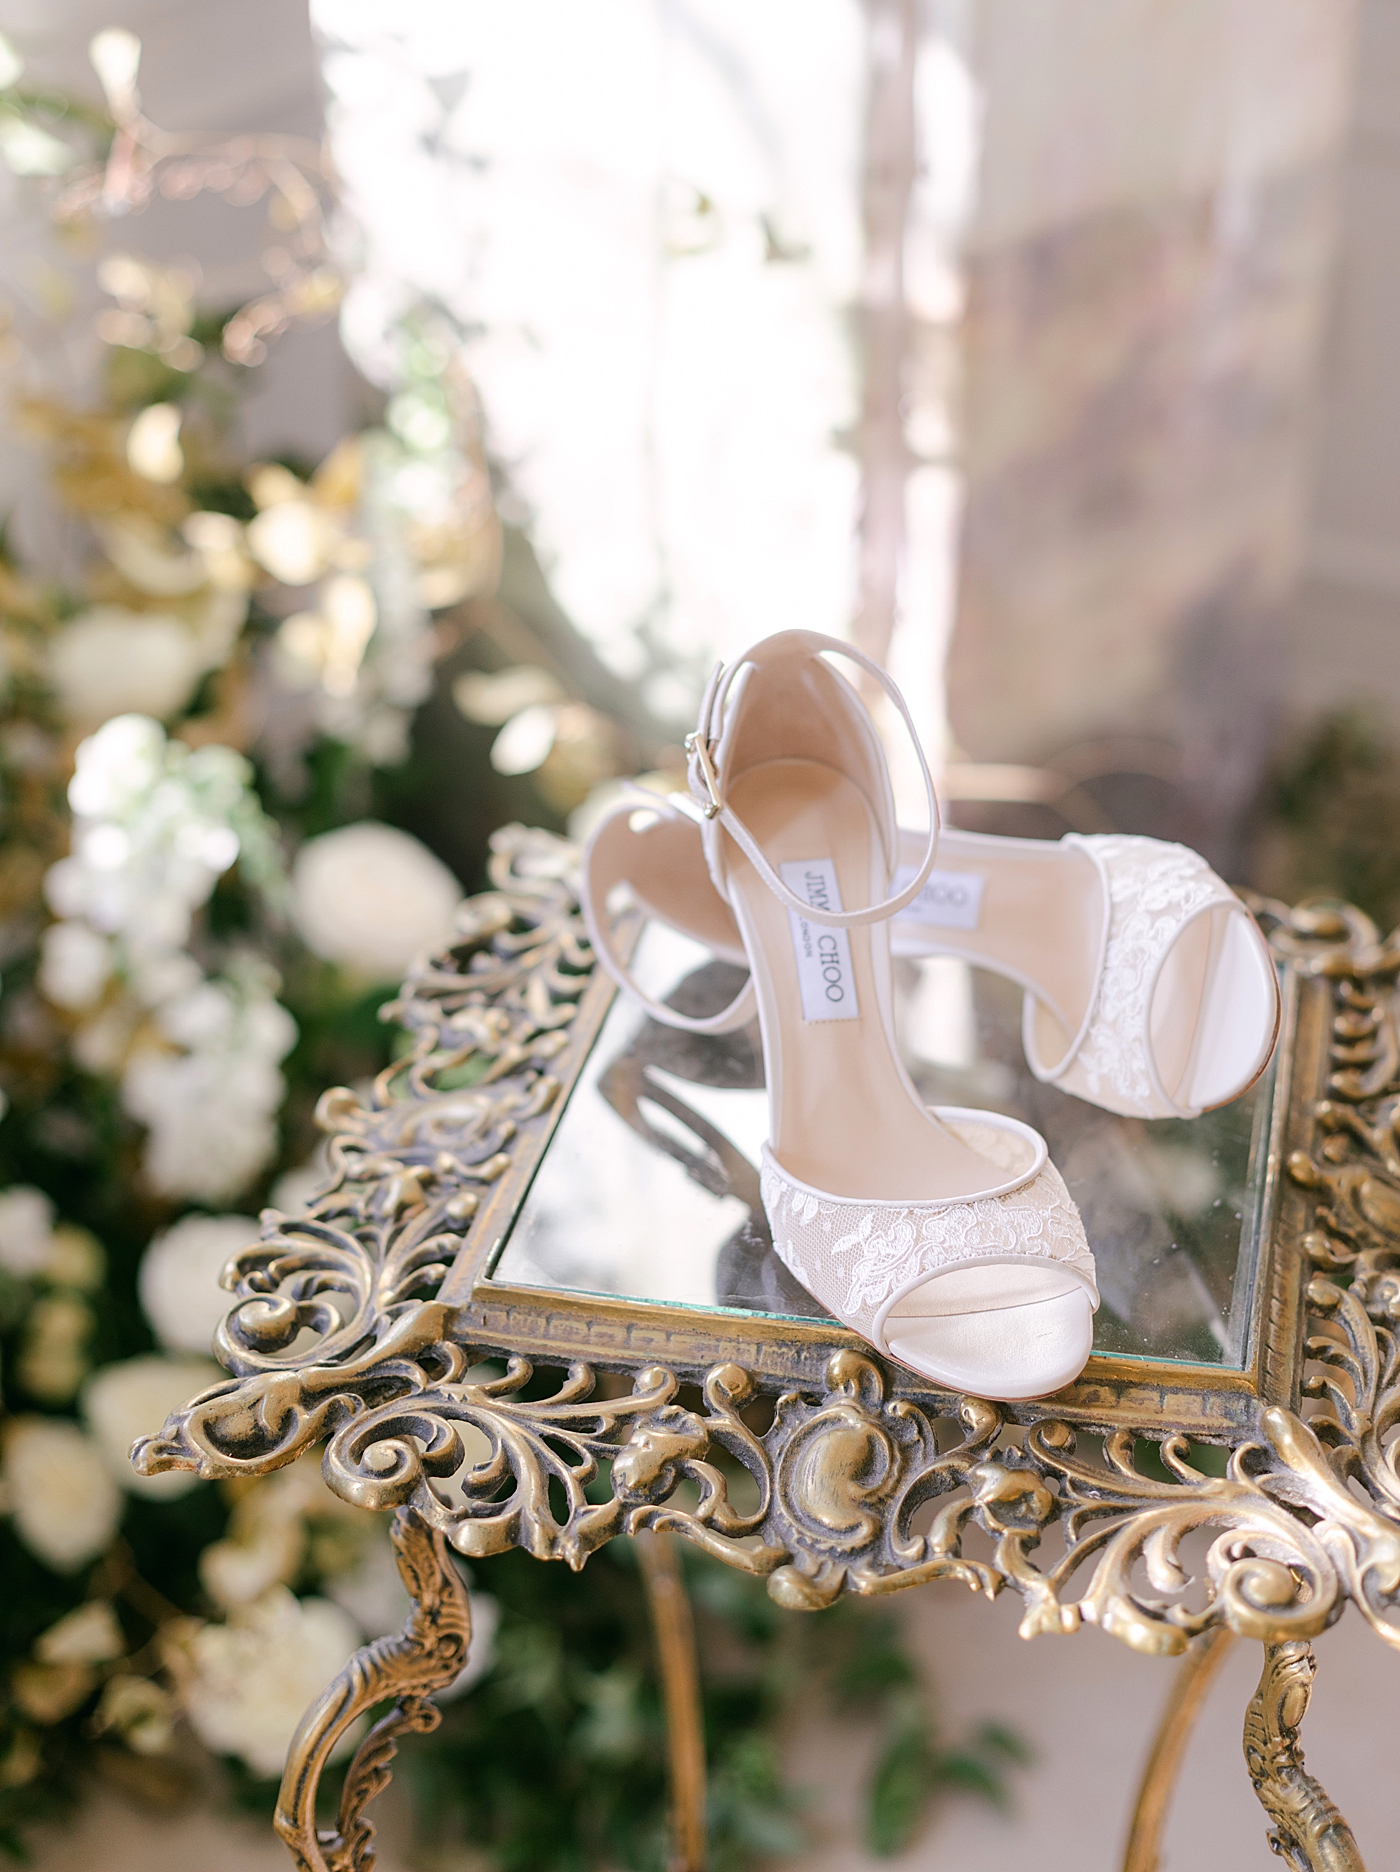 Jimmy Choo heels styled on a glass table during Old World Romance Editorial | Photo by Hope Helmuth Photograpghy